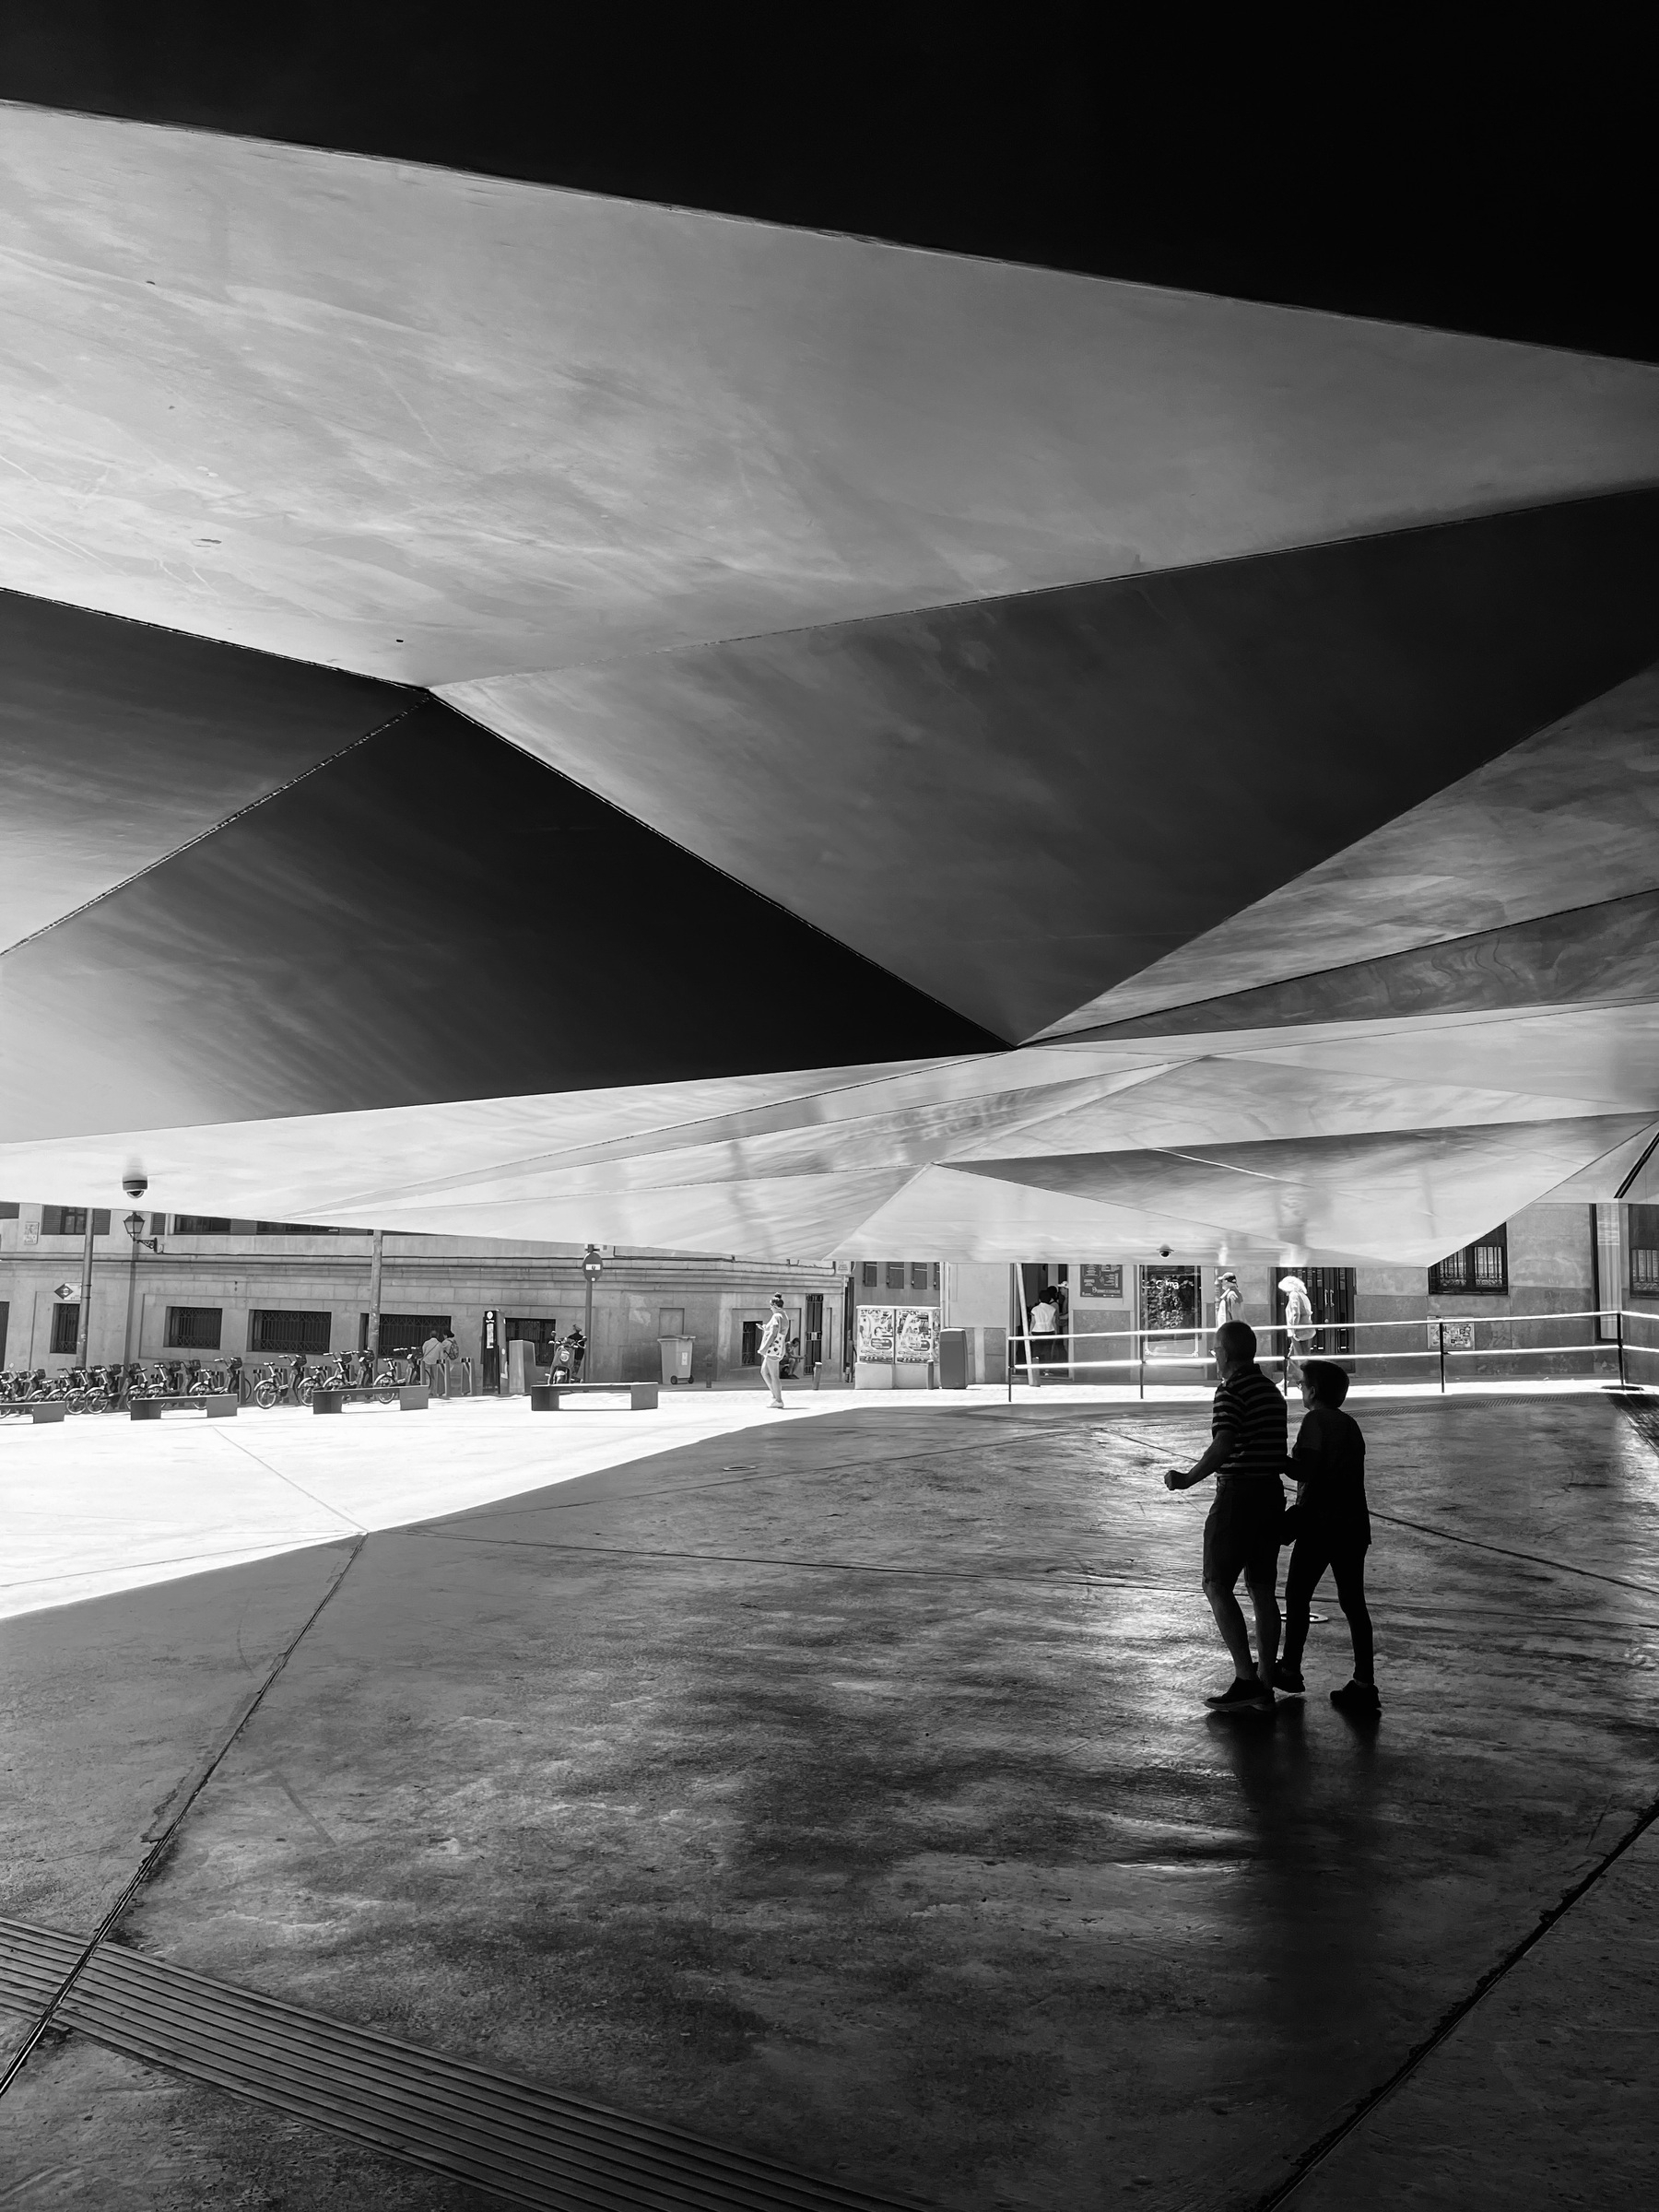 A black and white photo showing a couple walking under a low roof made up of shapes, in the sun away from the building people walk around.